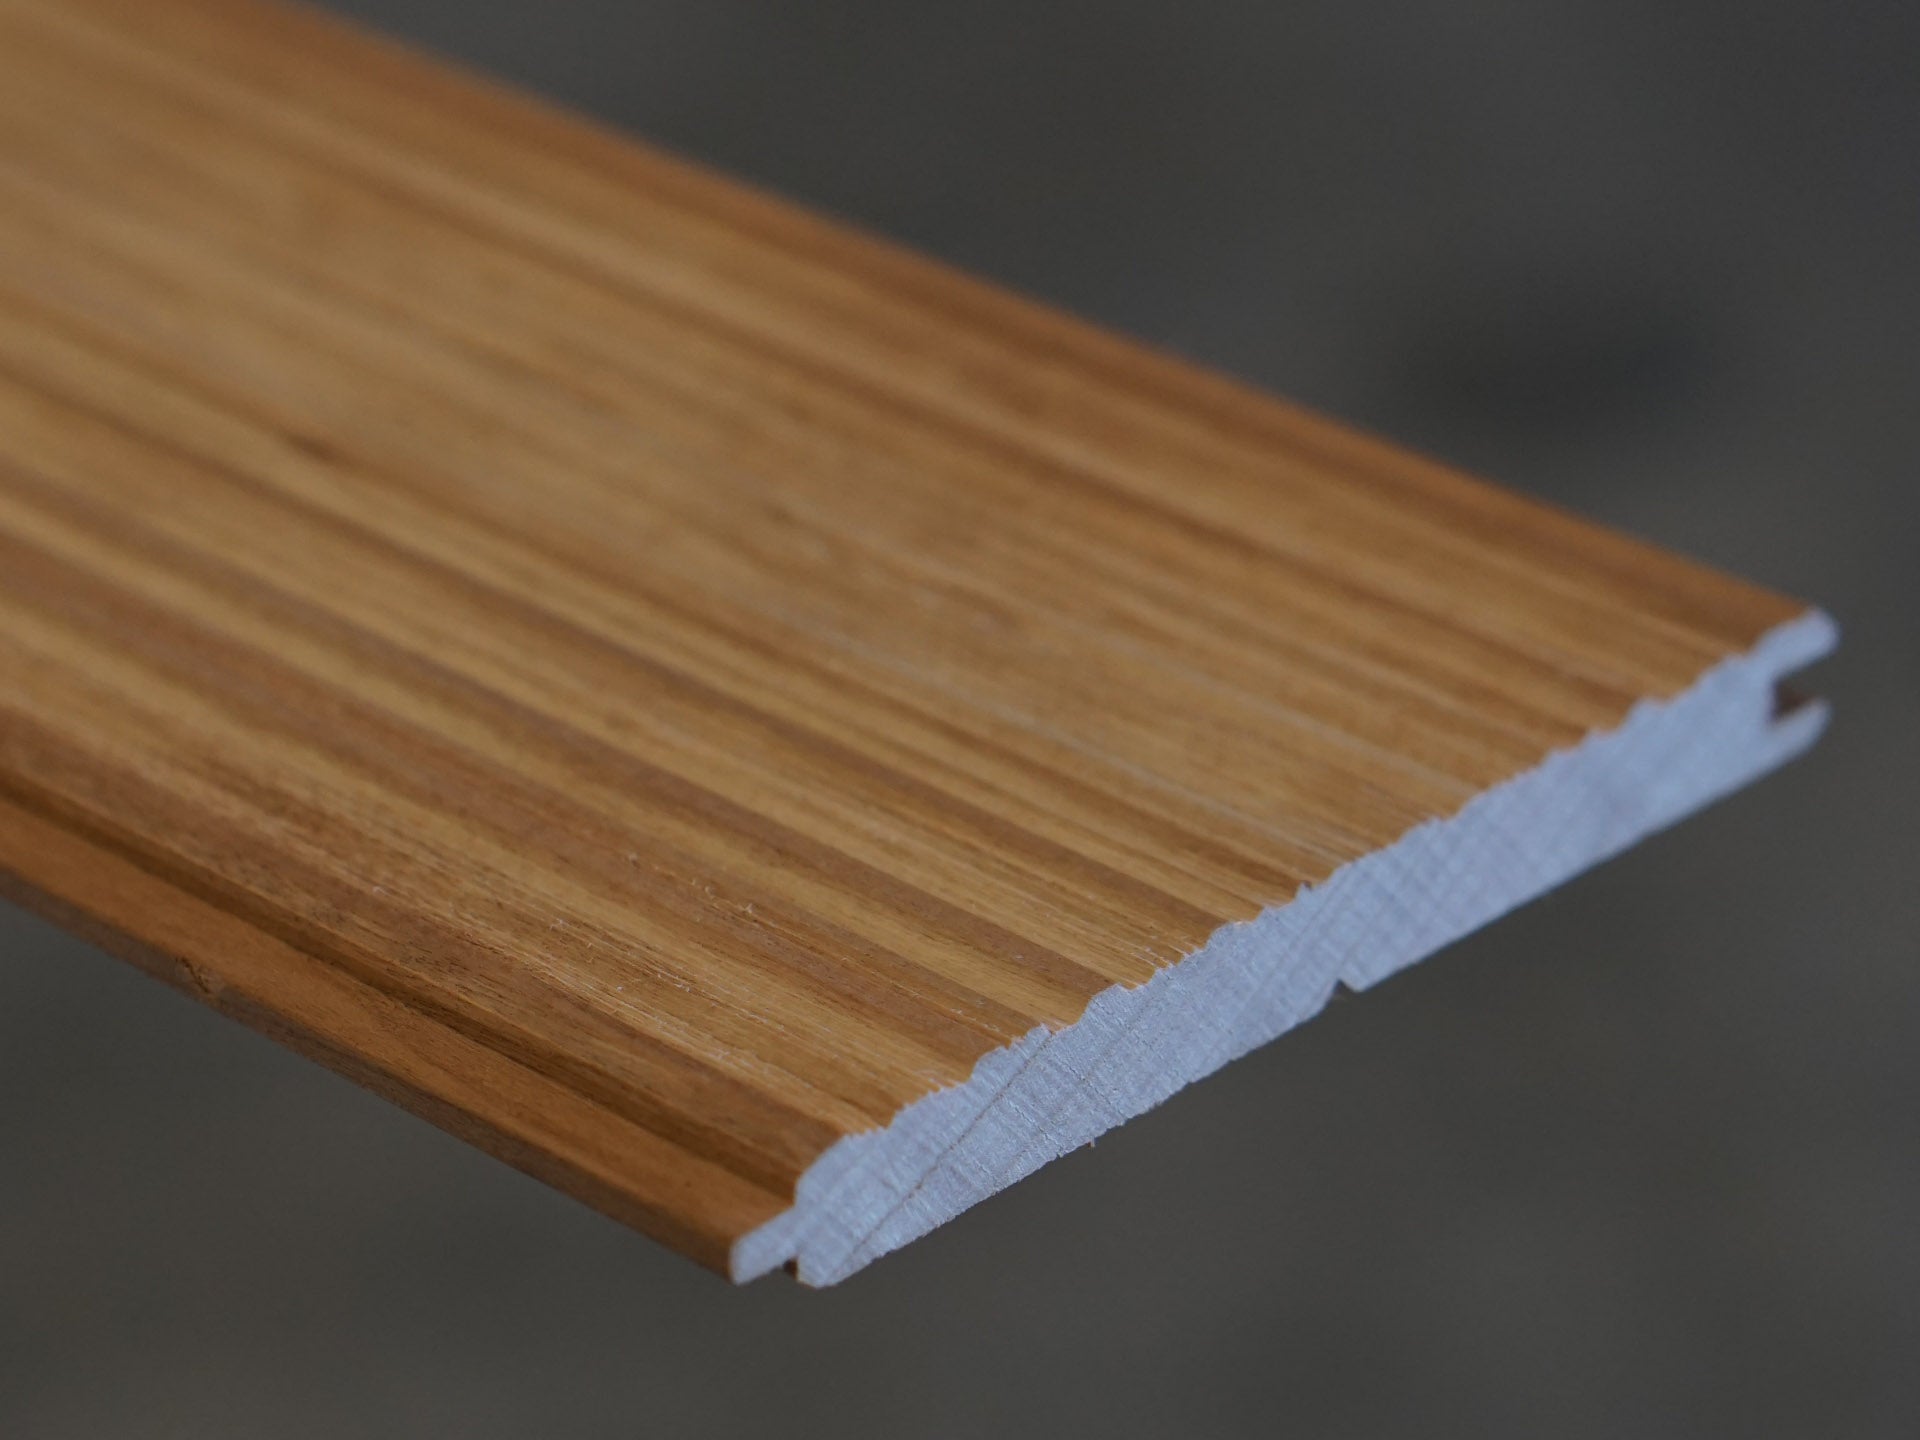 Close up of Weldtex tongue & groove cherry hardwood plank consisting of a combed, striated, brushed wood appearance common in mid-century modern homes and design